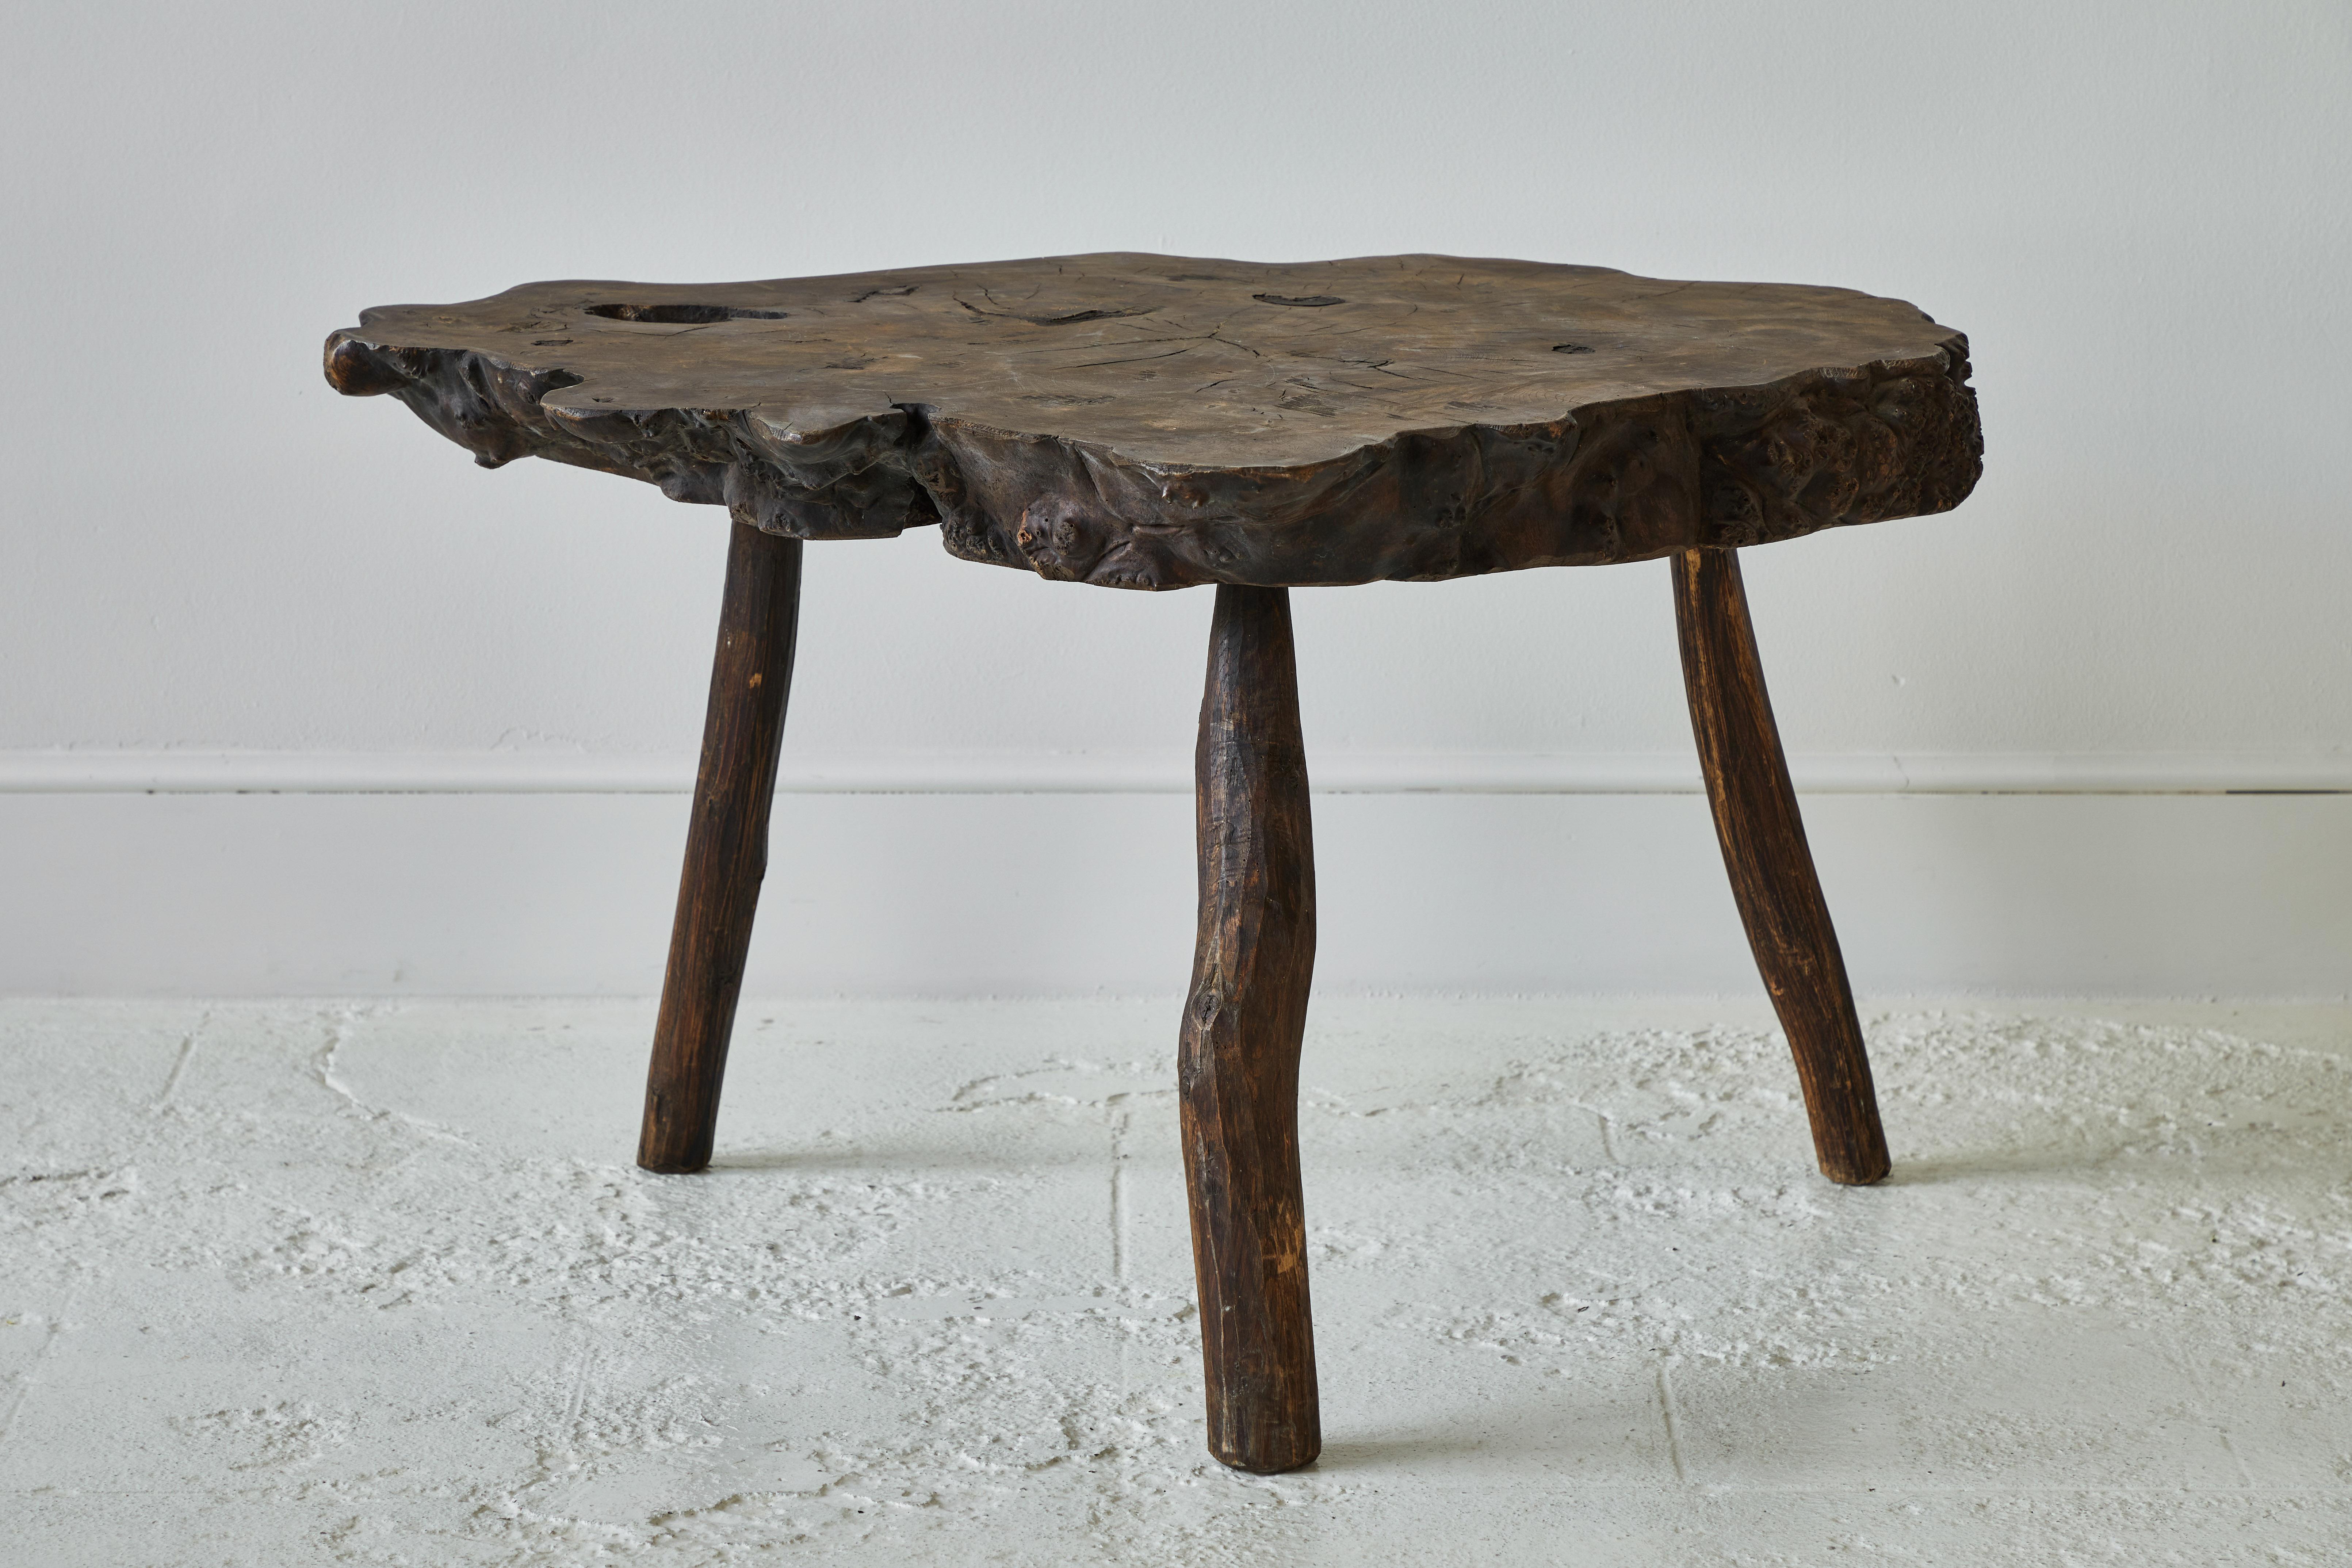 Beautiful burled and knotted three-legged rustic root table.